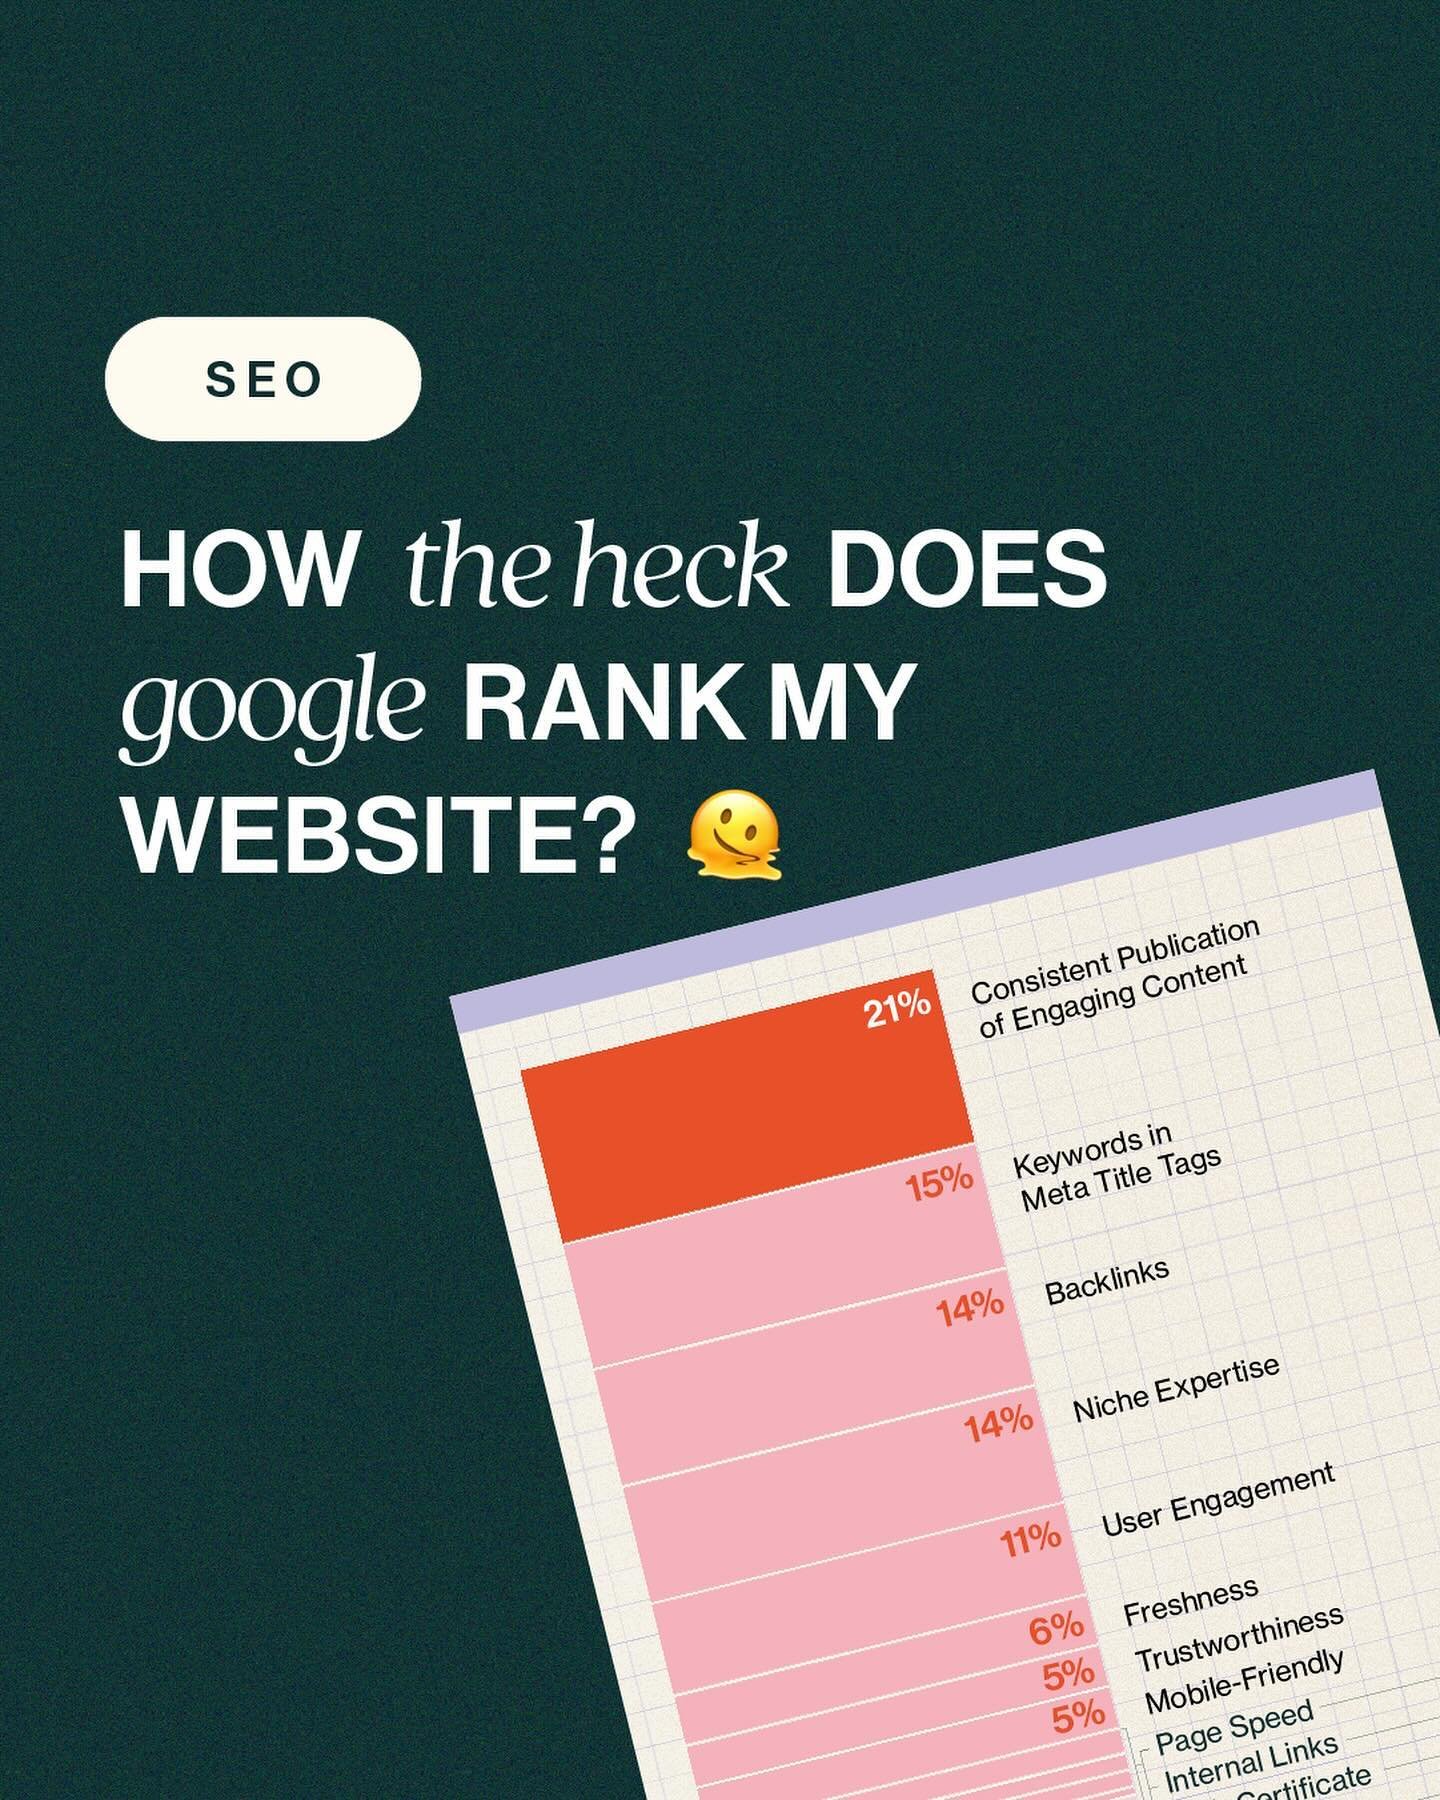 &lsquo;Cos who doesn&rsquo;t want more people finding their business on Google?! 🤓

By now, you&rsquo;ve probably heard of SEO for your website. 

👉 If you haven&rsquo;t&mdash;it stands for Search Engine Optimisation, and it&rsquo;s CRUCIAL to gett